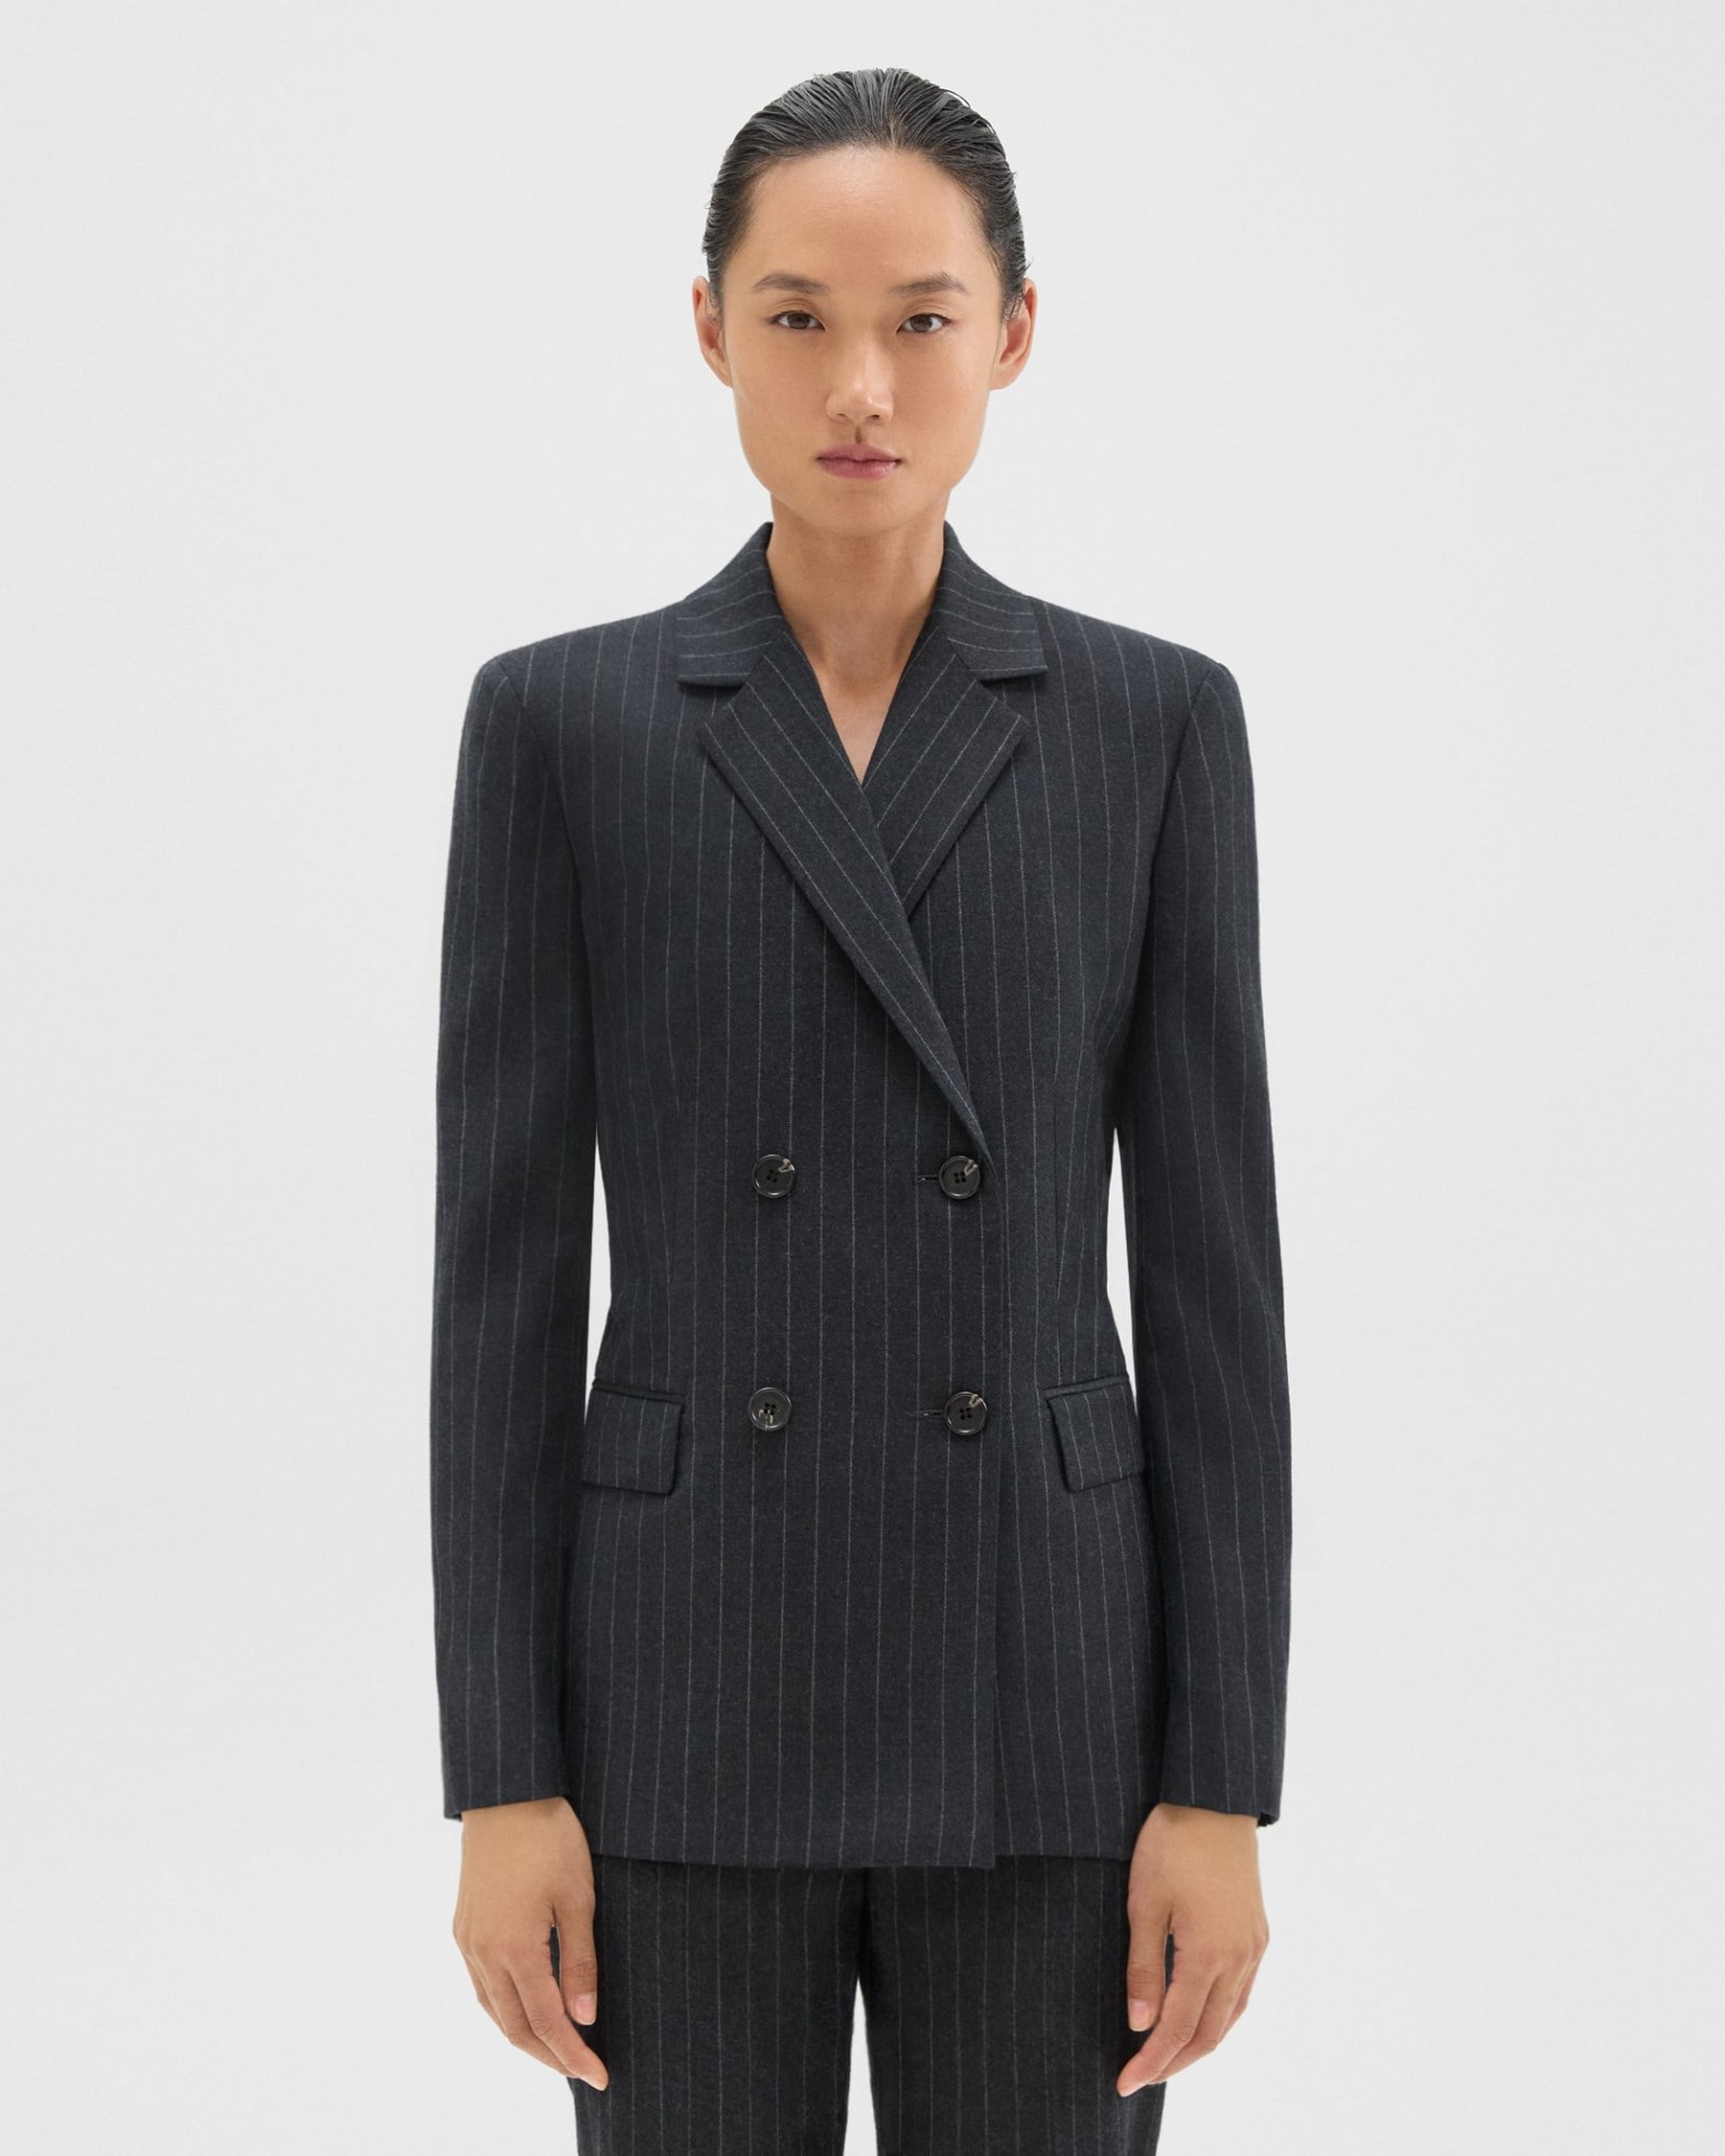 Theory Double-Breasted Slim Blazer in Pinstripe Wool Flannel